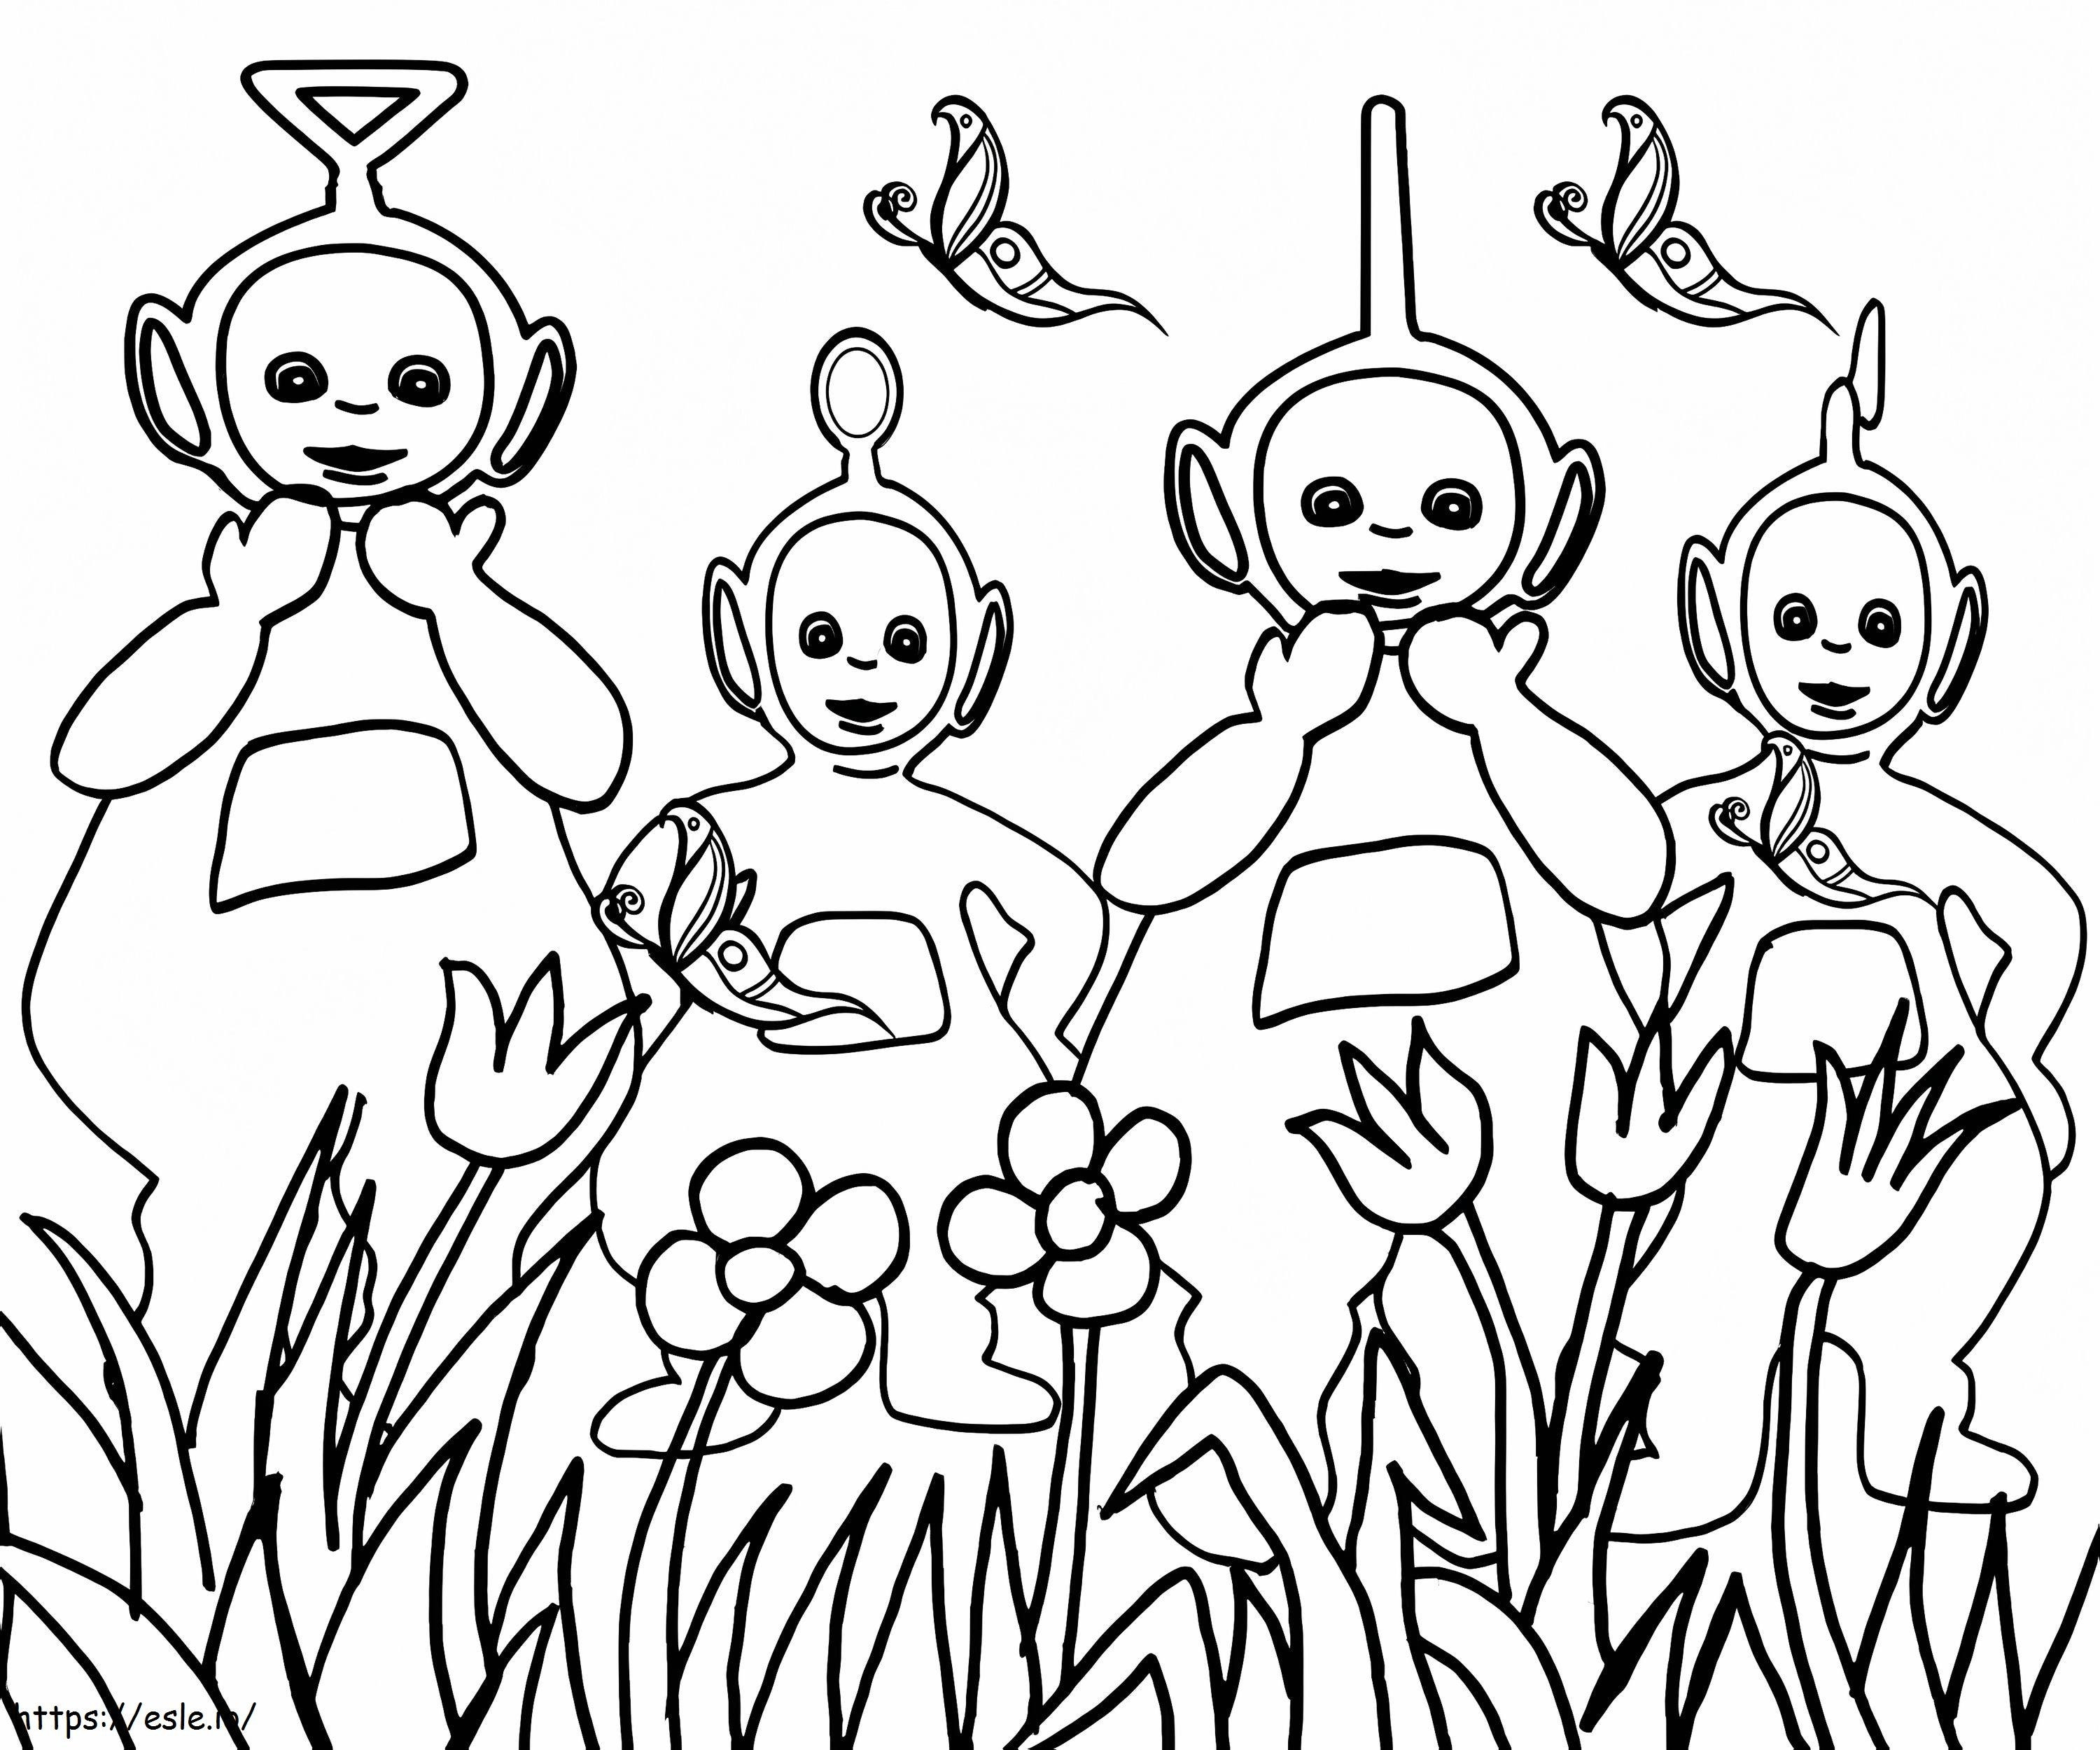 Adorable Teletubbies coloring page